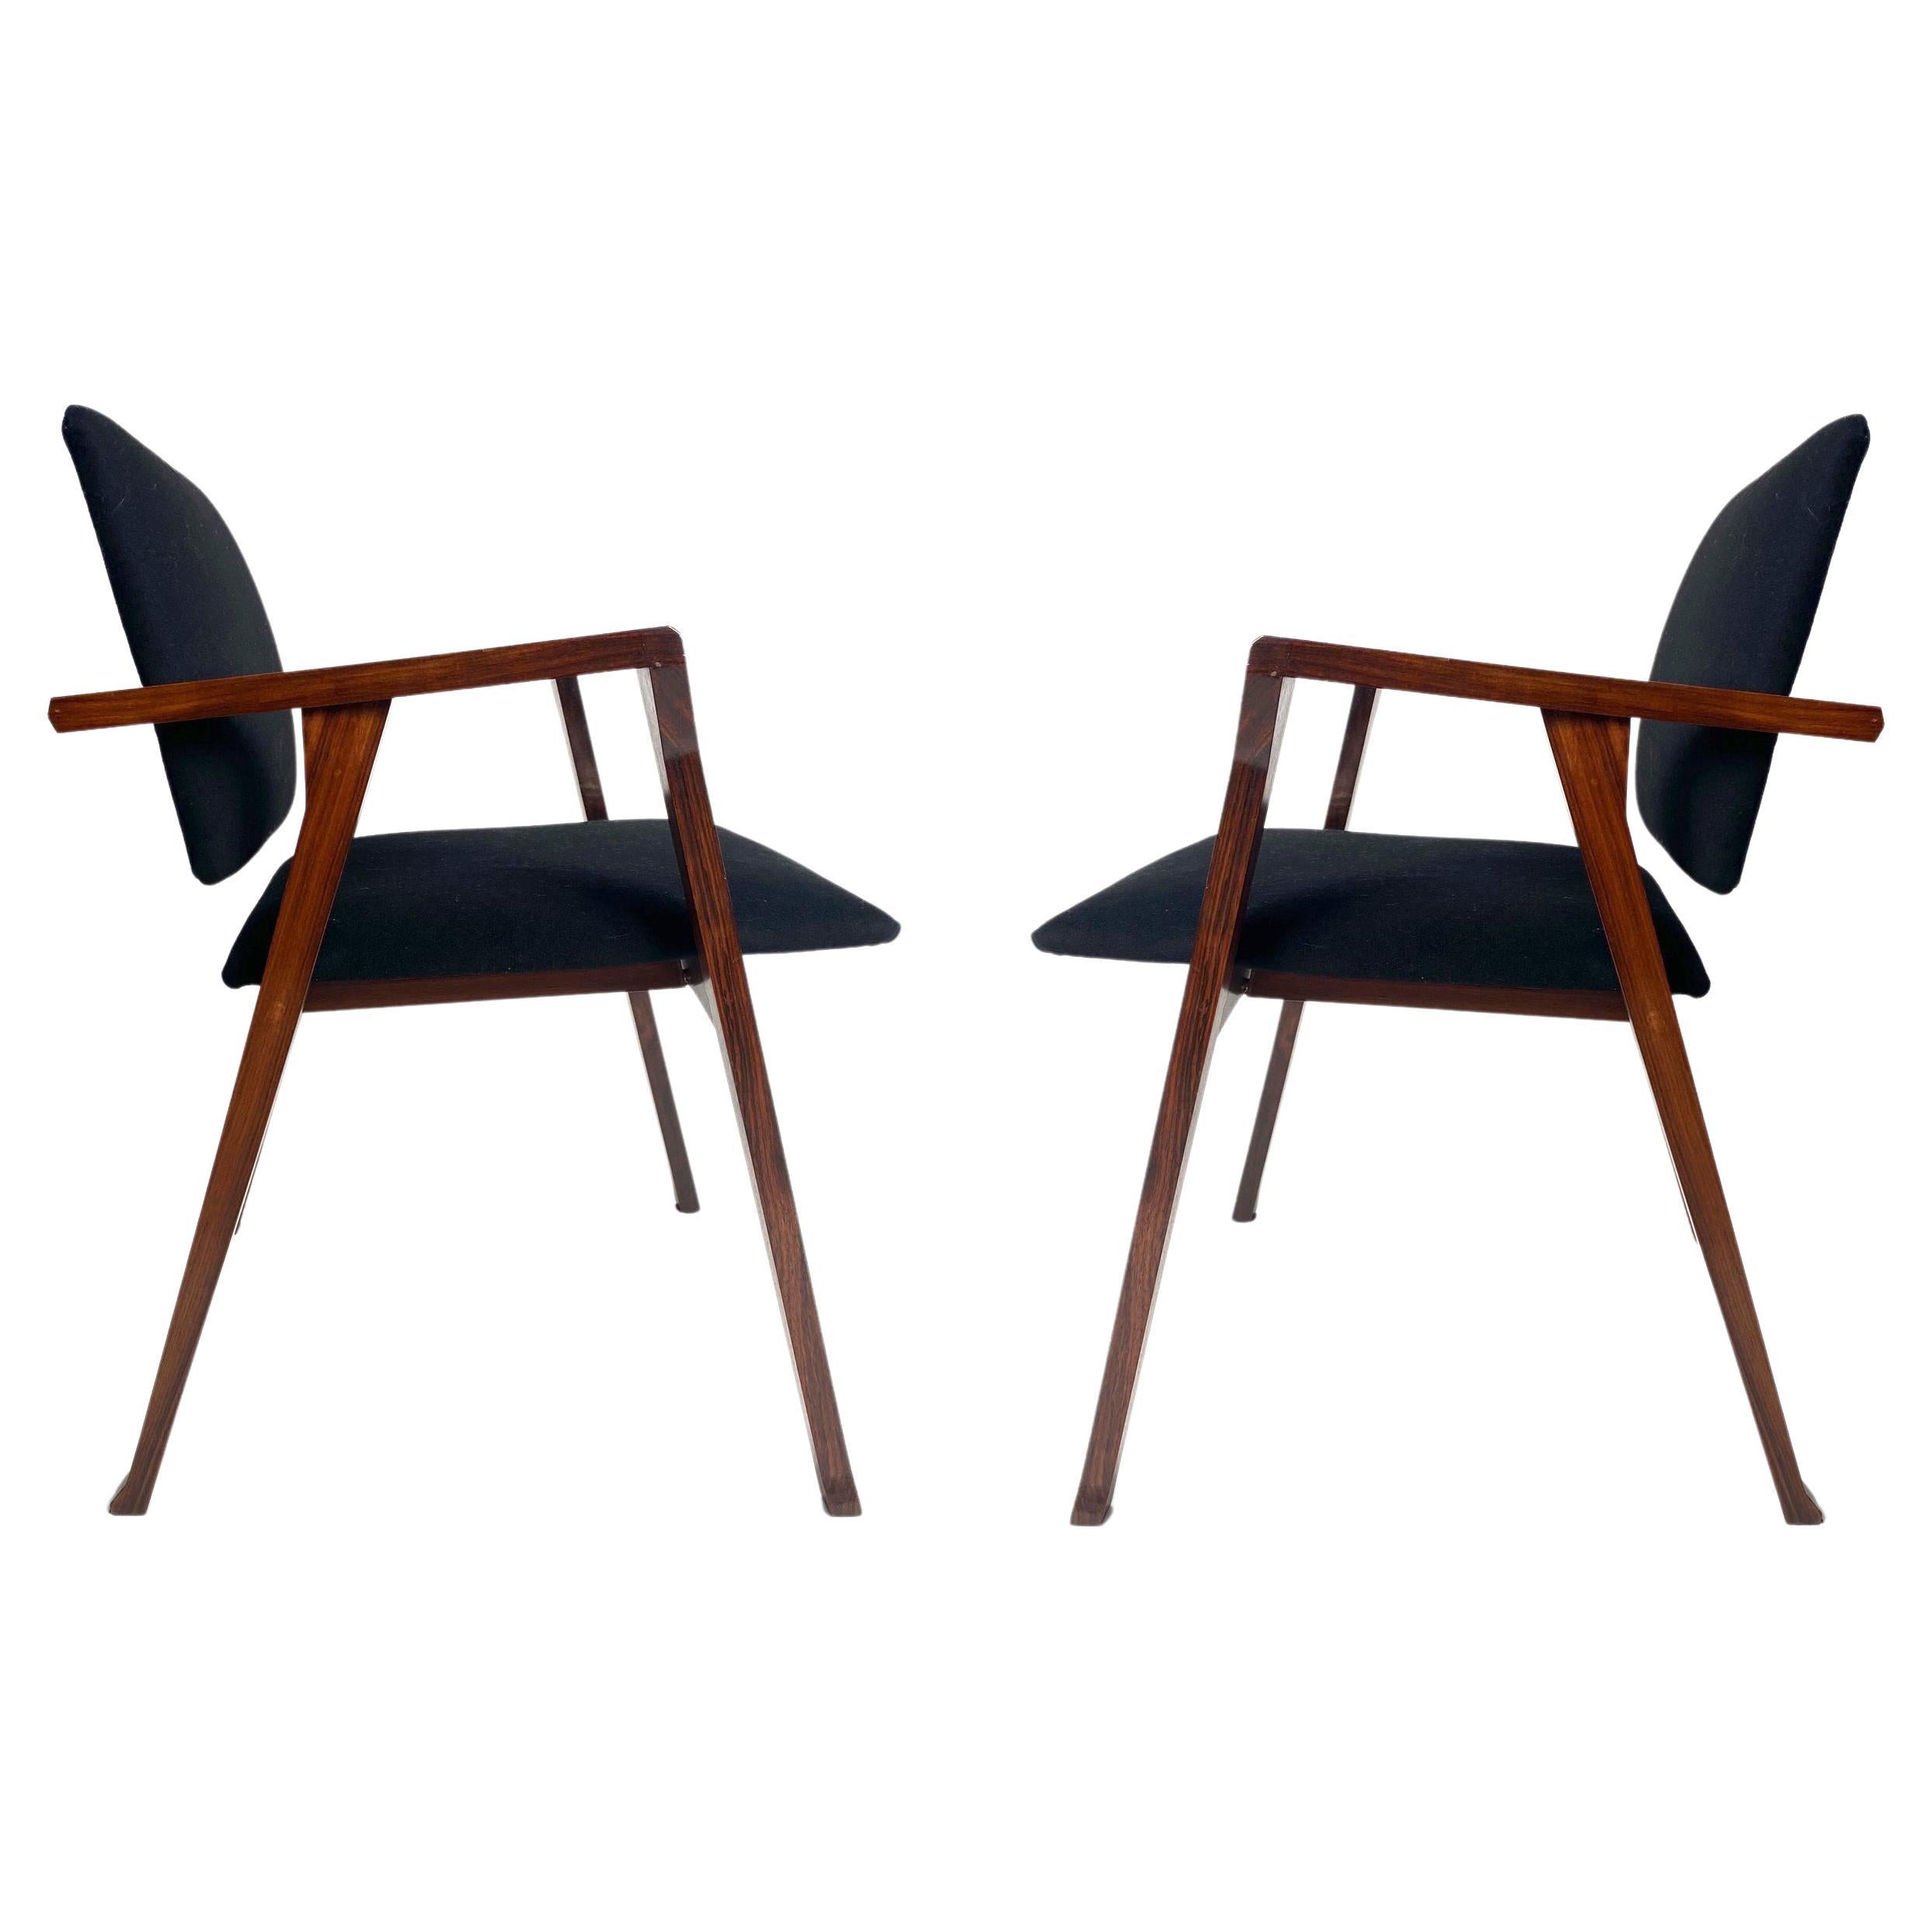 Pair of Early "Luisa" Chairs, Franco Albini for Poggi, Italy, 1953 Early Edition For Sale